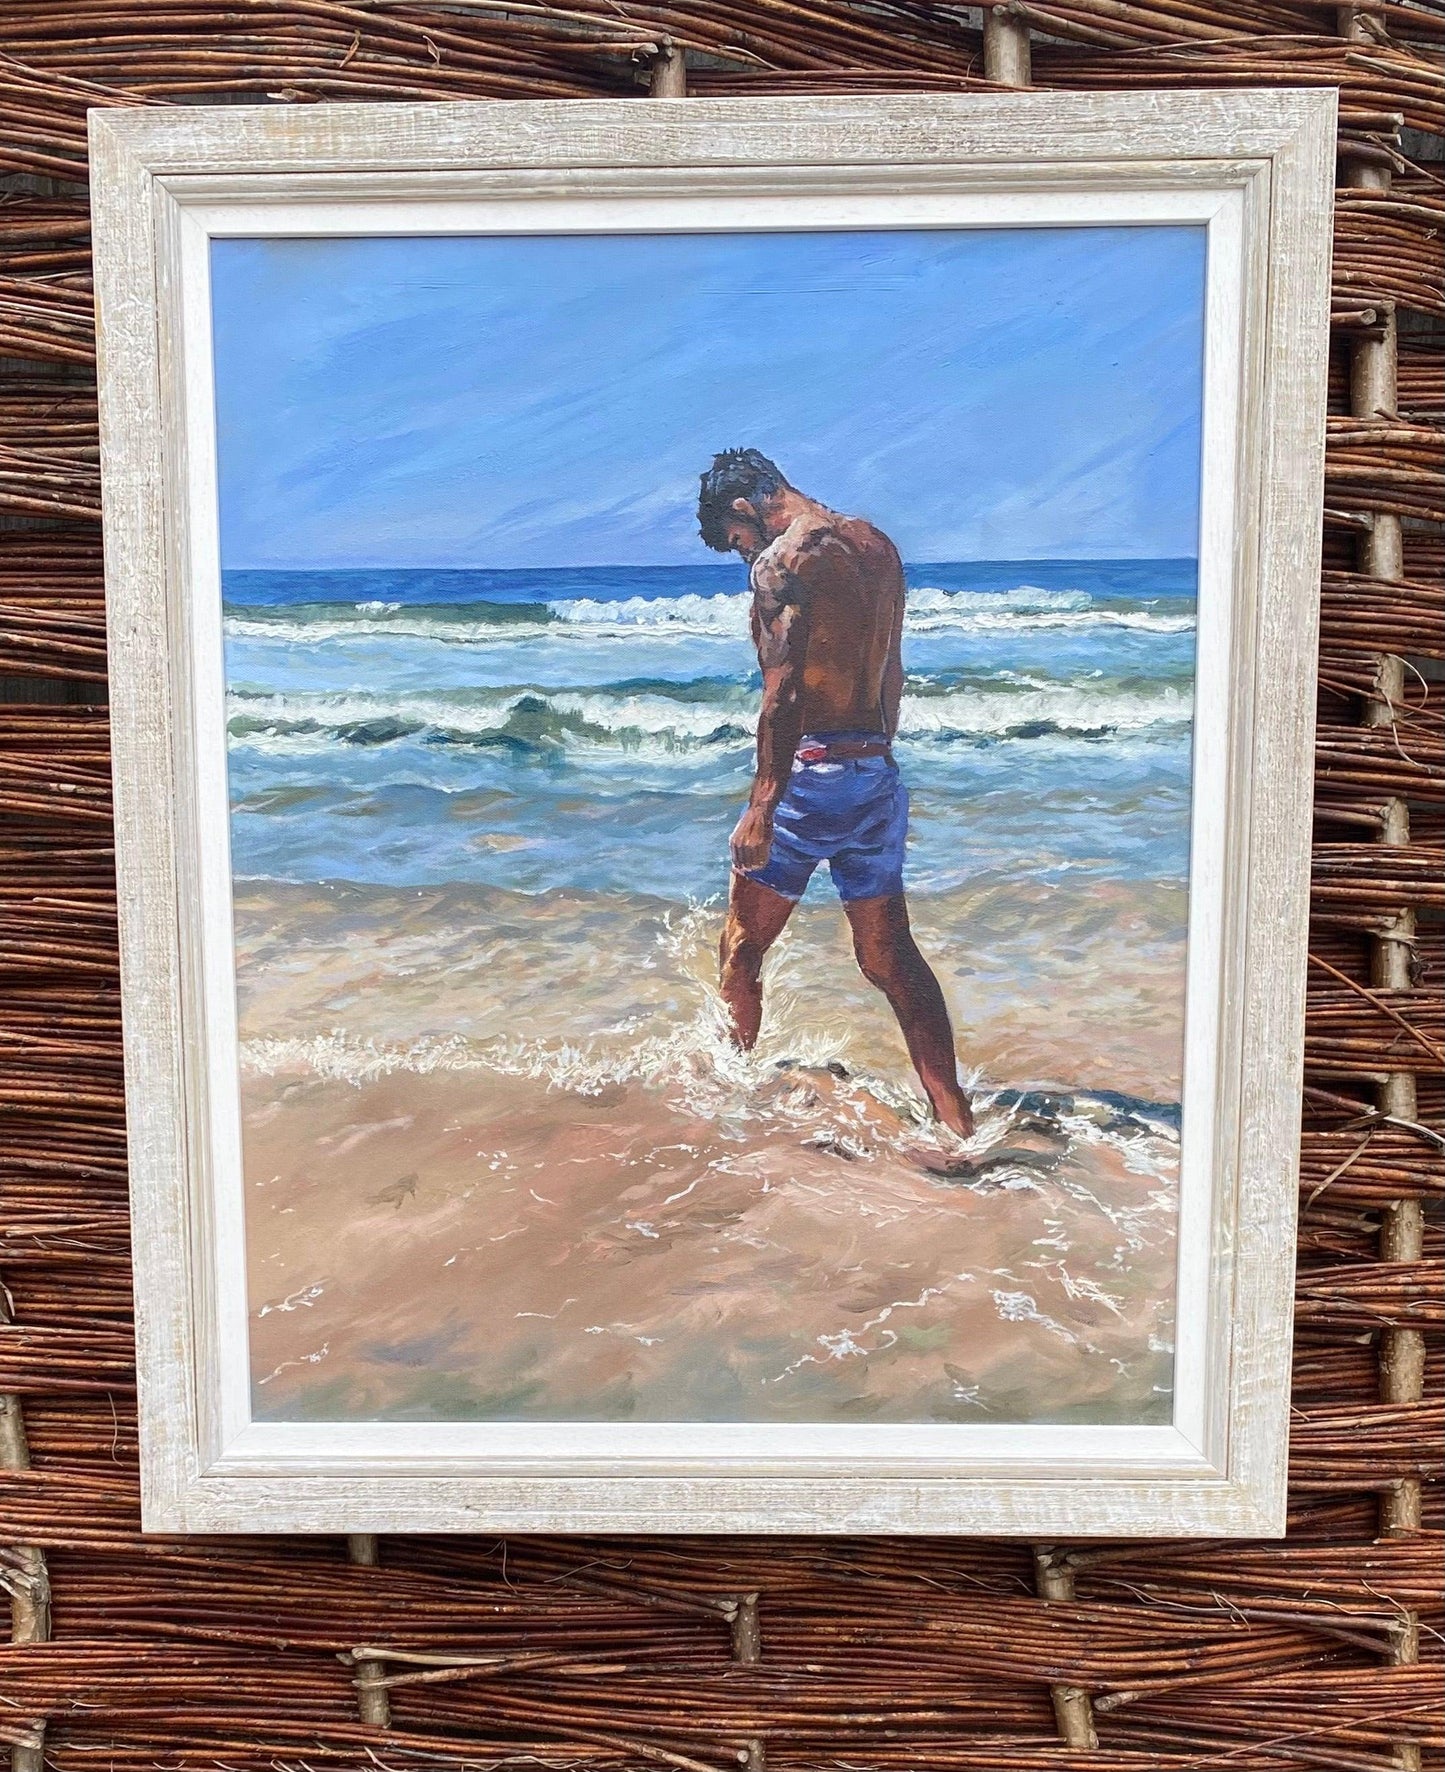 Seascape painting with young man kicking surf